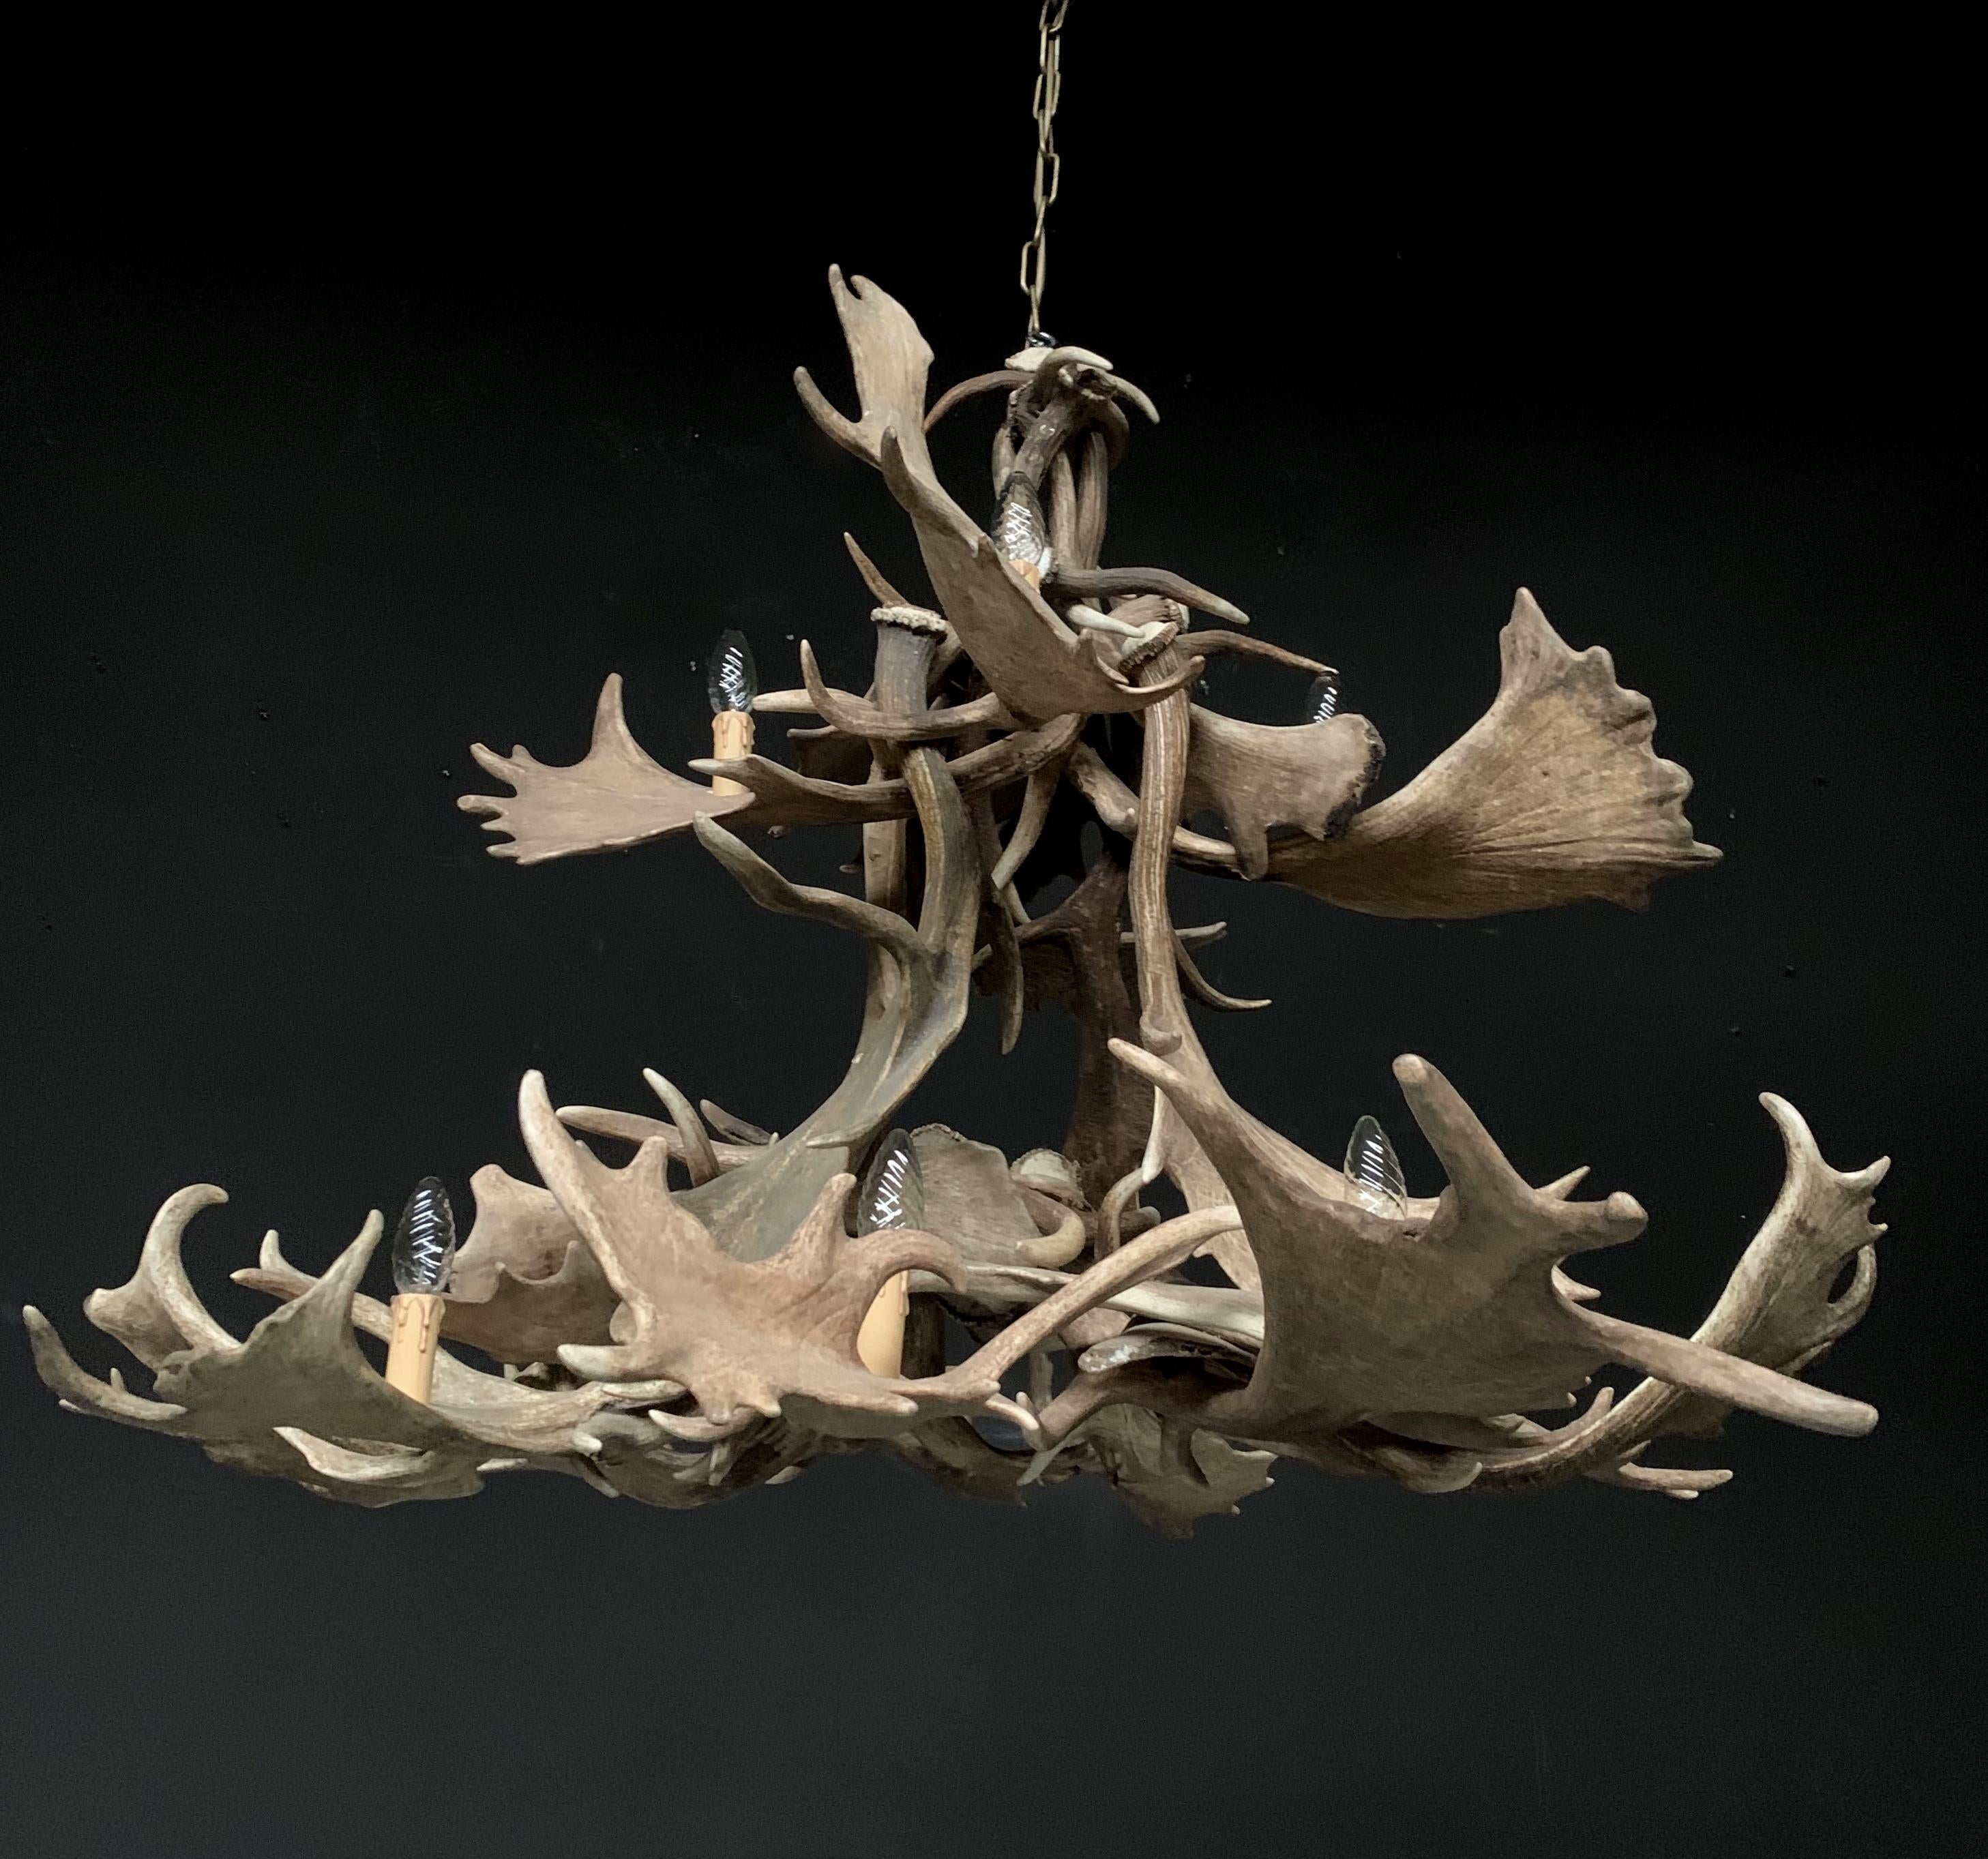 Modern chandelier made of antlers (HG 112-A). The chandelier is made of fallow deer antler. The electrical wiring is concealed in the antlers and the quality of our chandeliers is really high. We can make any antler chandelier entirely according to